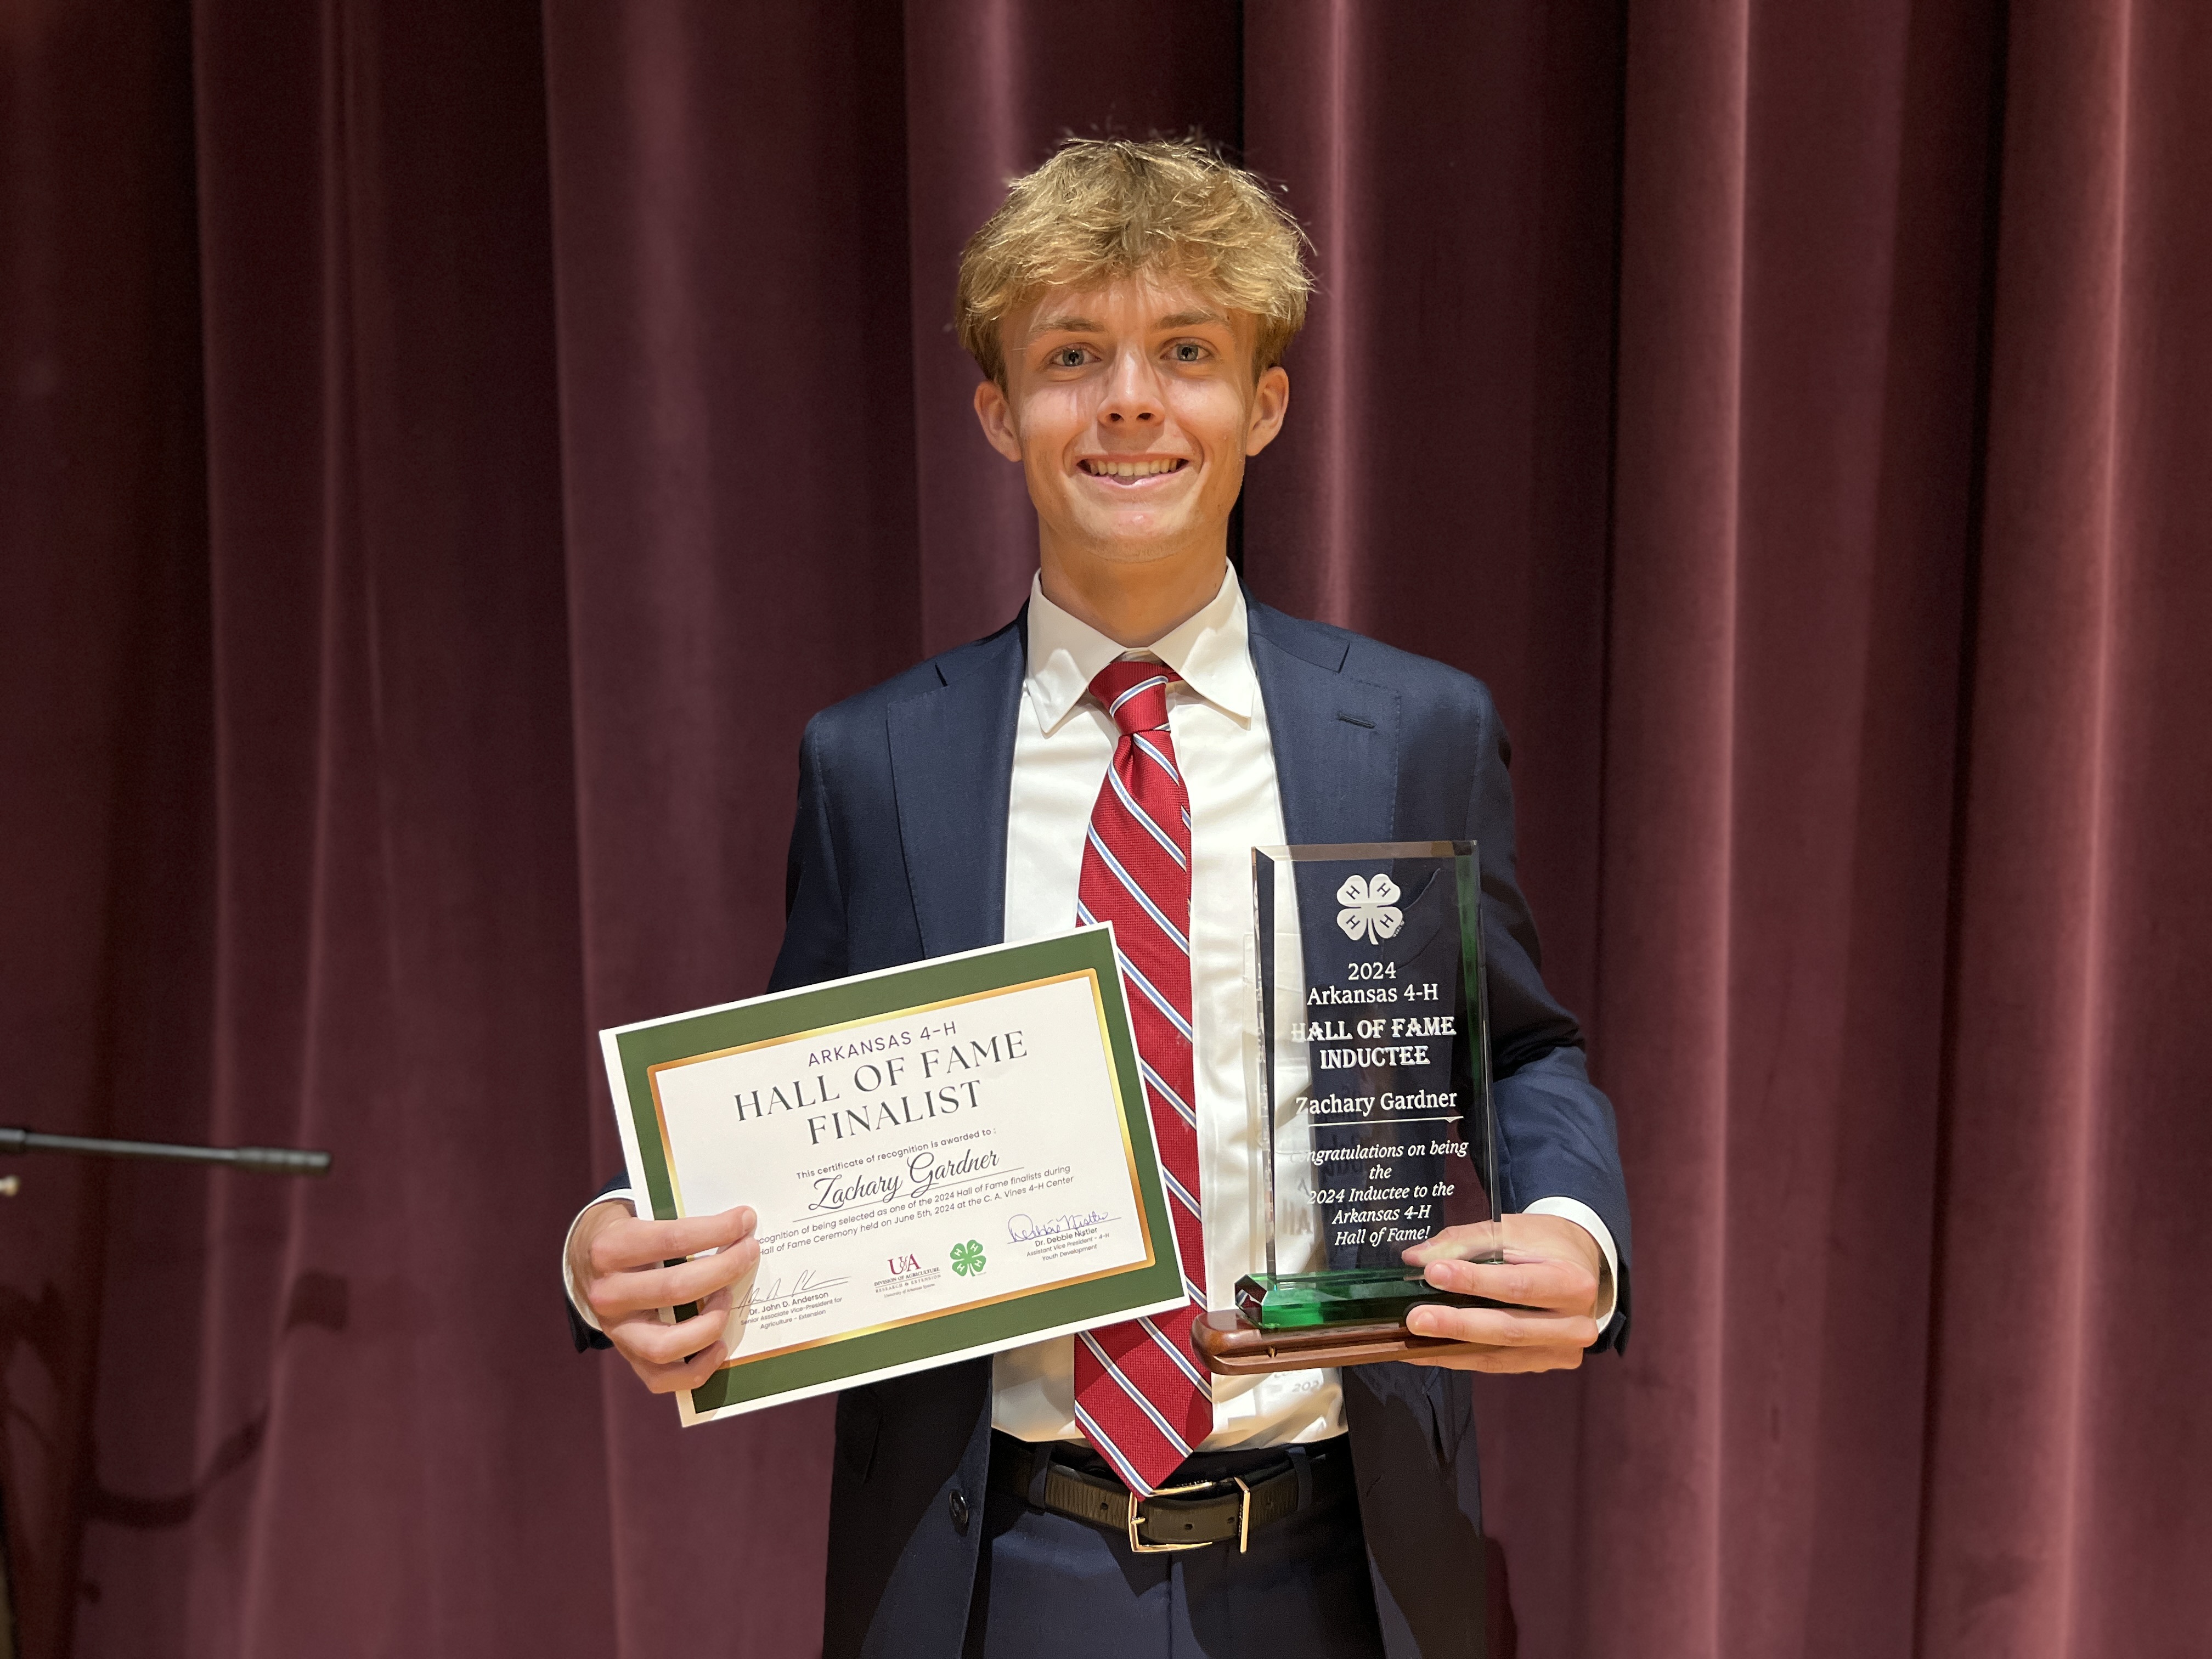 Zach Gardner holding Hall of Fame plaque and certificate